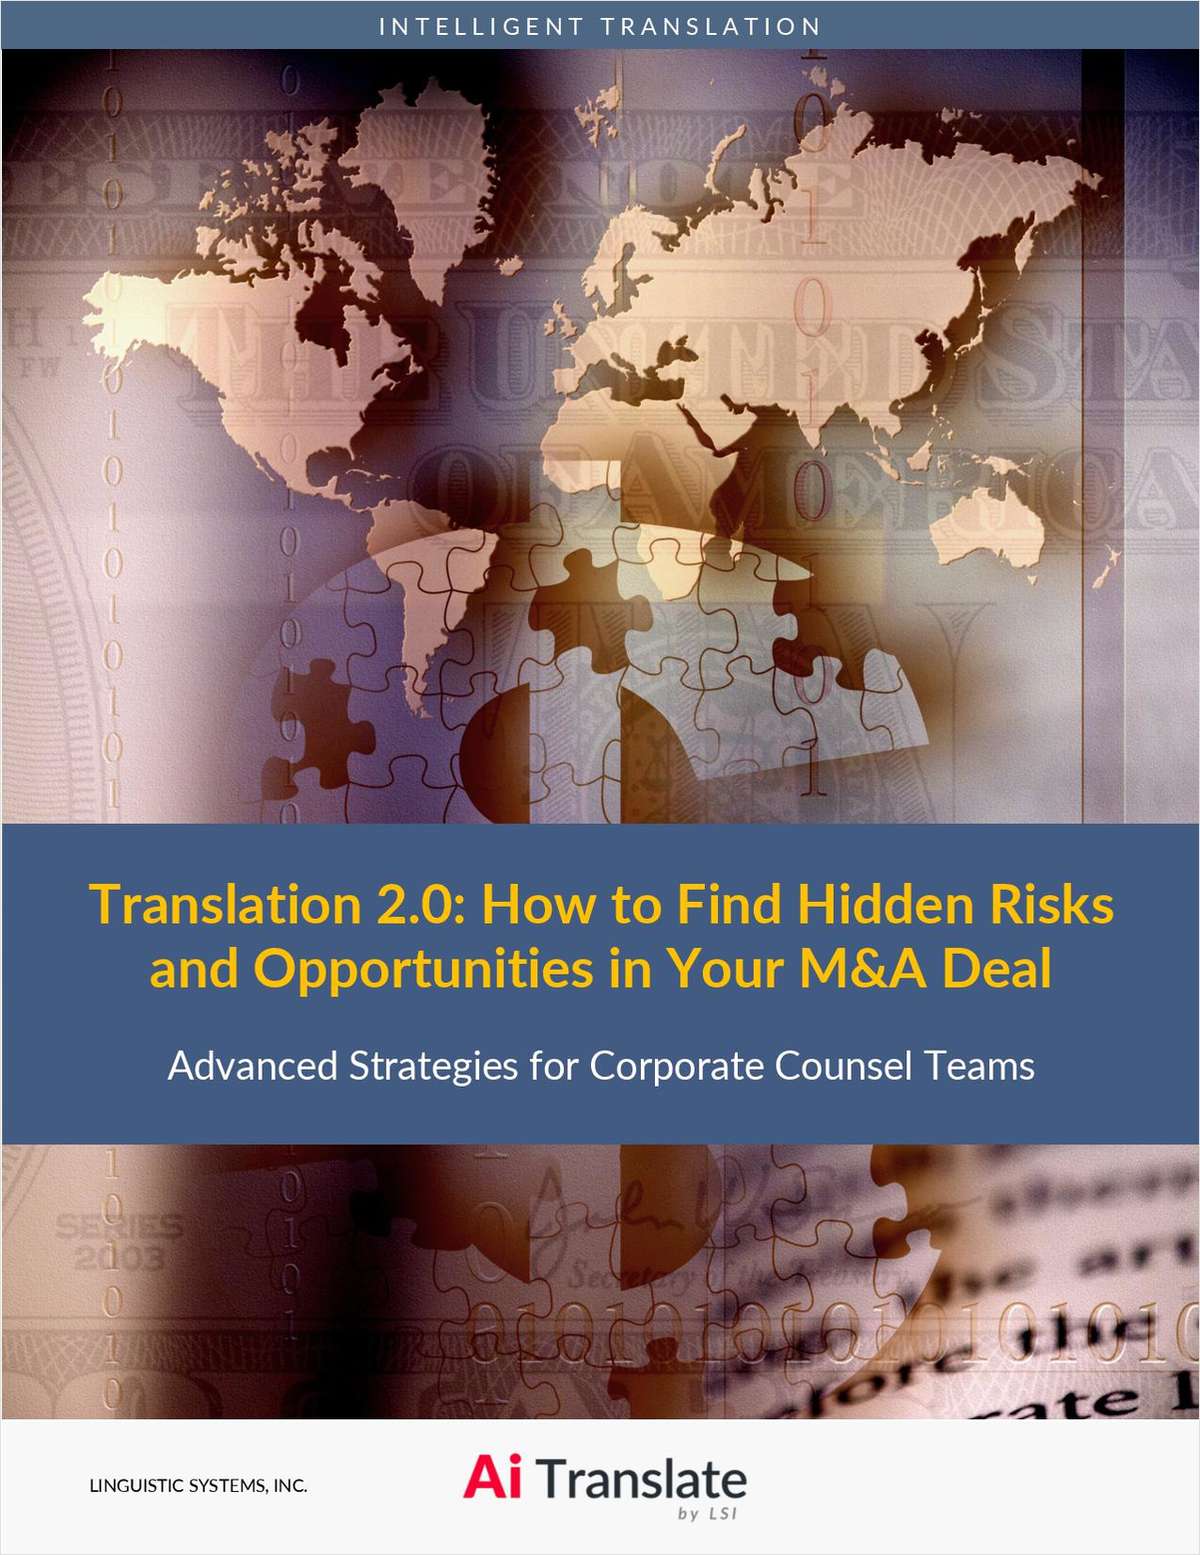 How to Find Hidden Risks & Opportunities in Your M&A Deal: Advanced Strategies for Corporate Counsel Teams